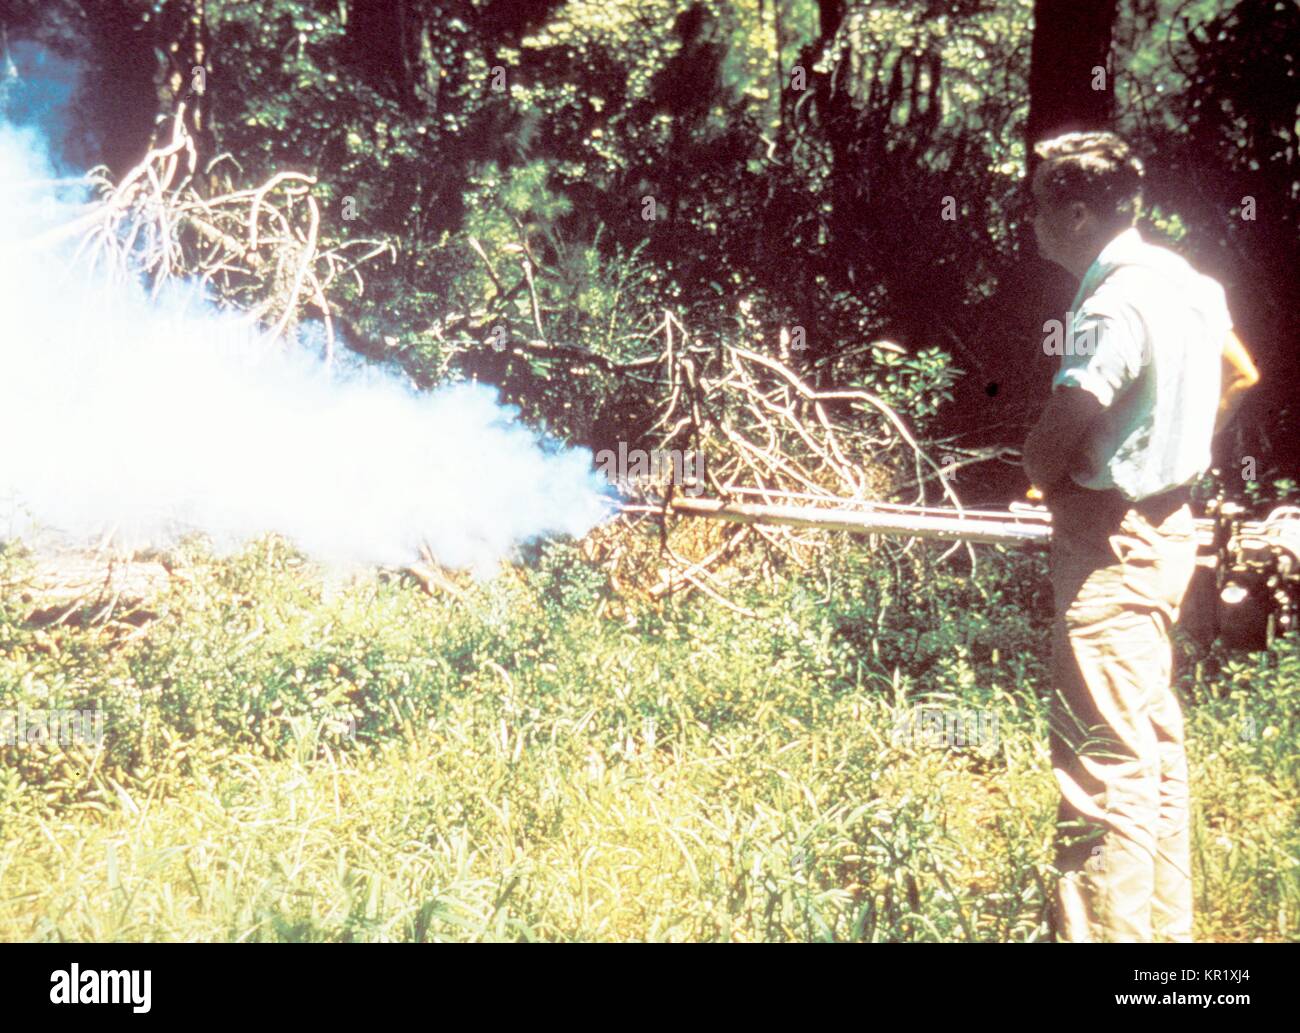 This field technician was using a ?, 1981. swingfog?. hand-held fog generator in an attempt to control populations of potential disease vectors by disseminating an insecticide fog into their outdoor habitat. This fog generator creates a heated, smokier mist than the larger particulate cold mist, which means greater hang time, or the length of time the insecticide smoke will remain suspended in the air. Oil- or water-based fogging solutions are able to be processed through this fogger. Image courtesy CDC. Stock Photo